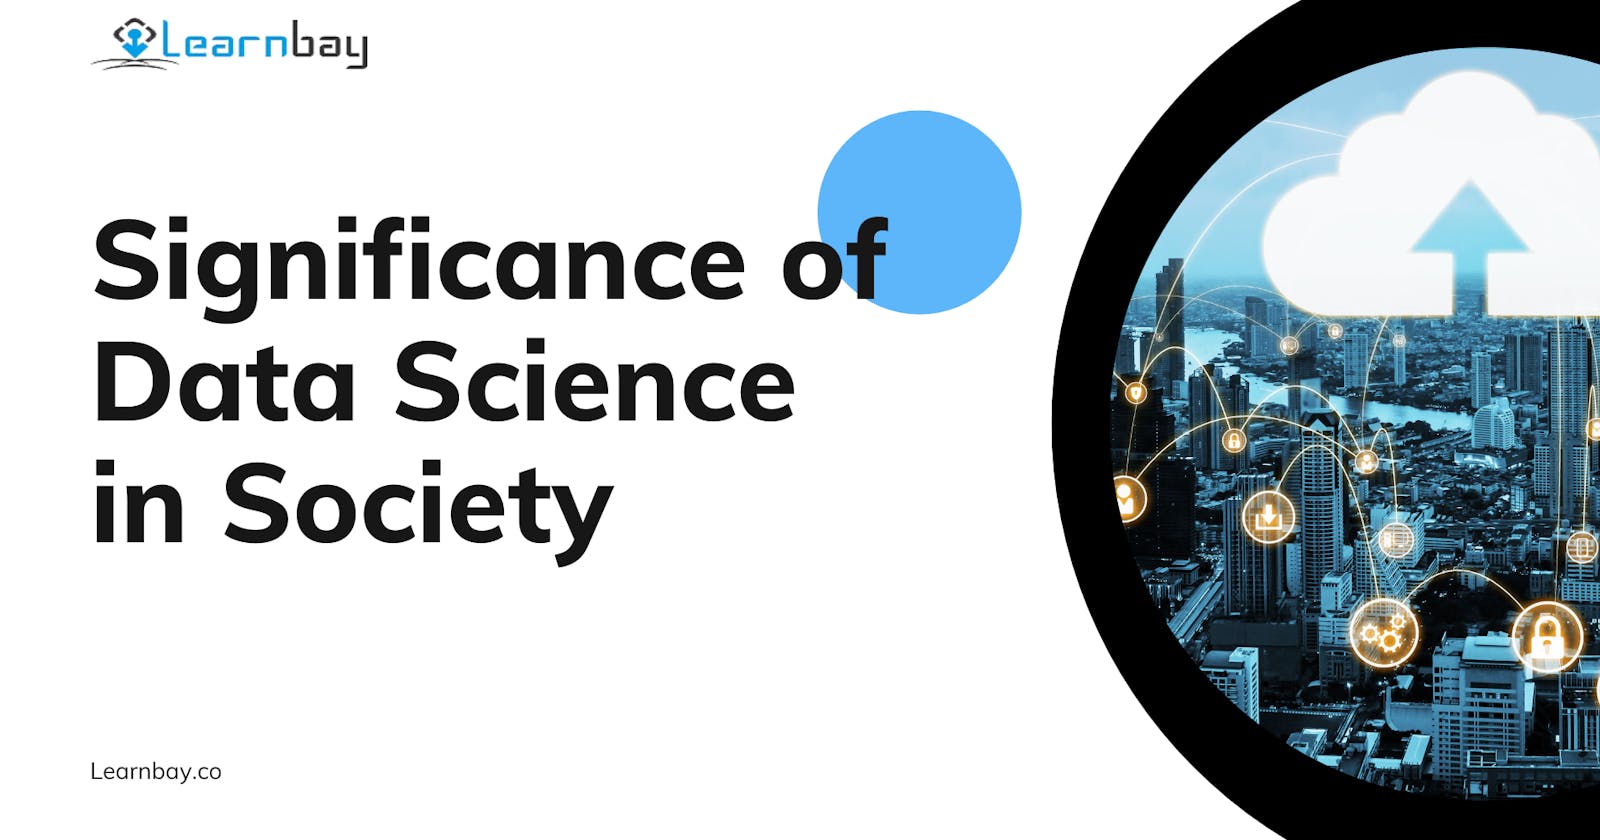 Significance of Data Science in Society